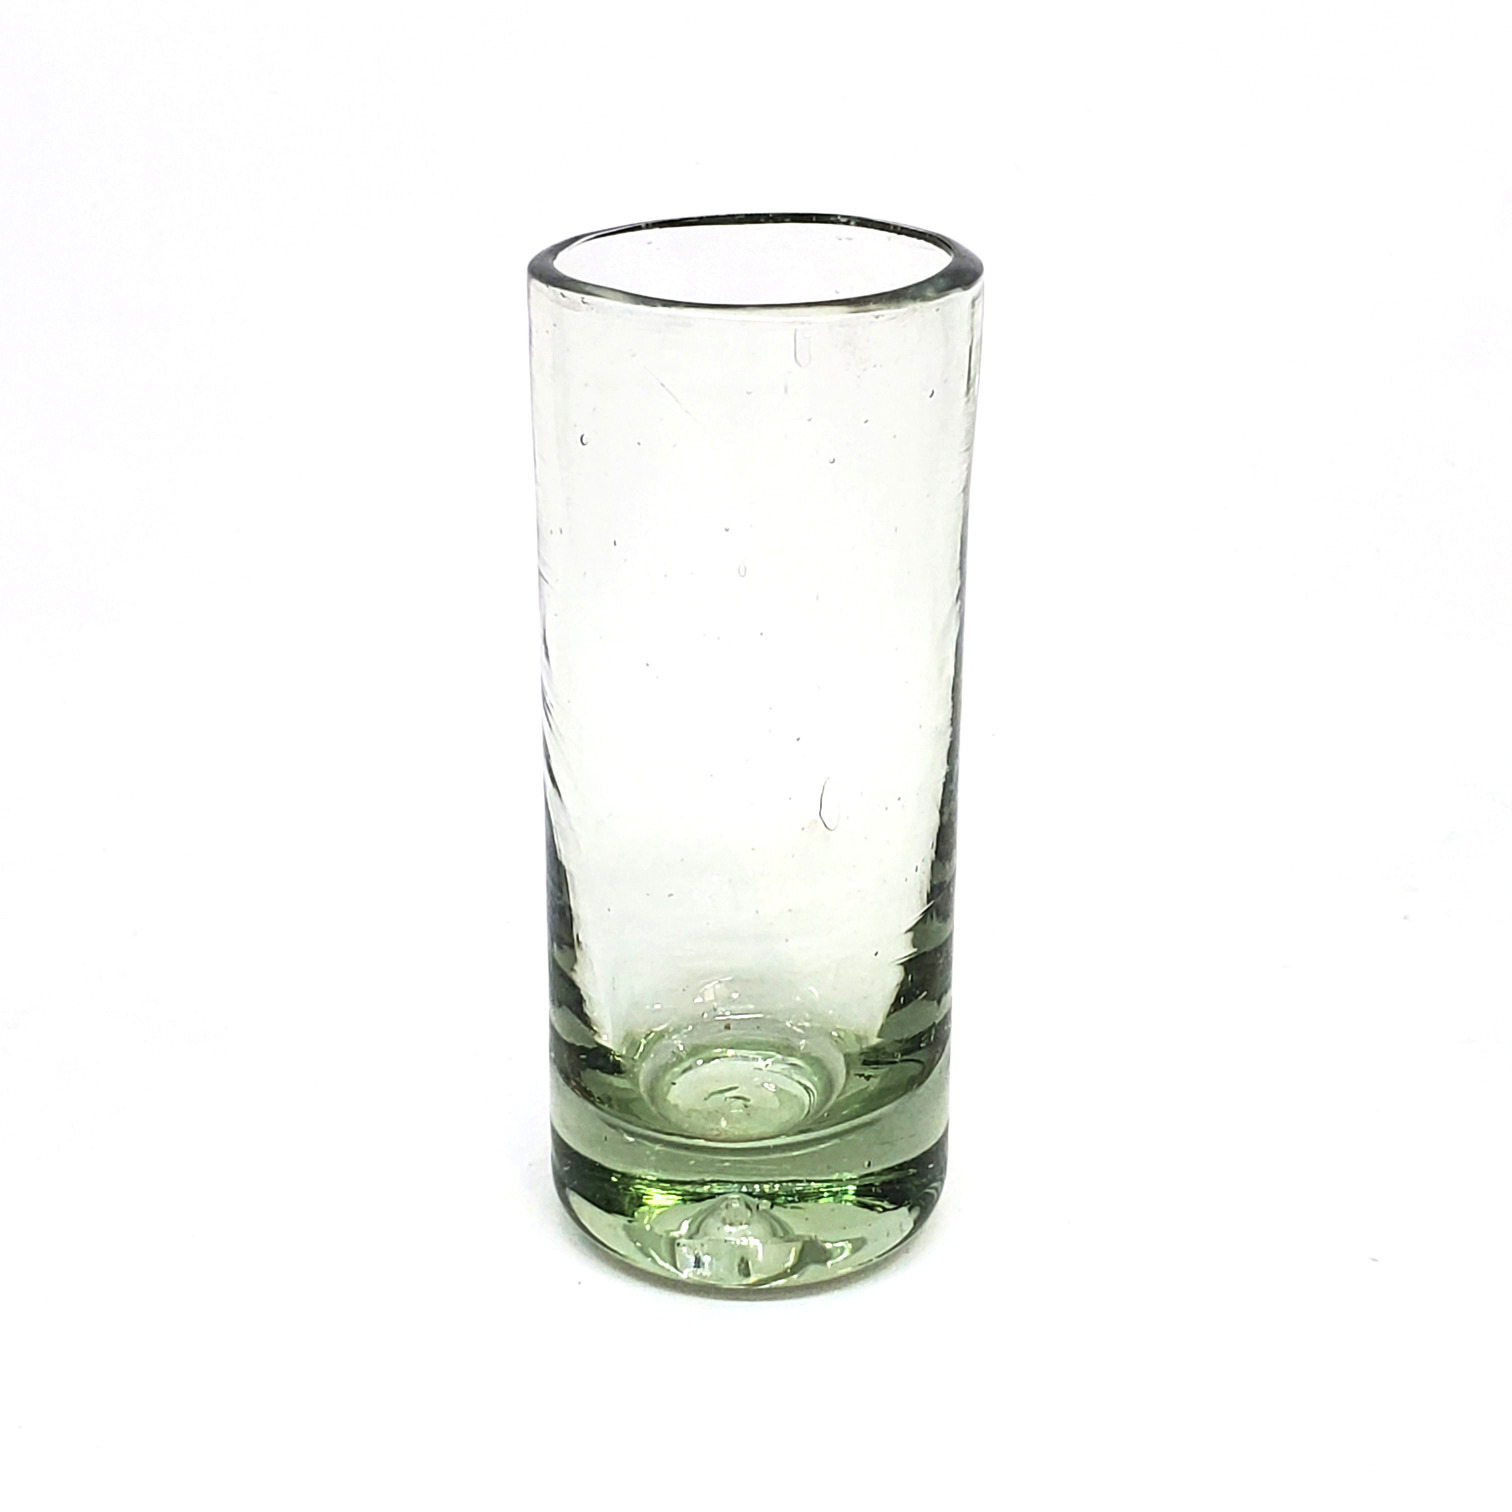 Clear Glassware / Clear 2 oz Tequila Shot Glasses (set of 6) / Sip your favourite tequila or mezcal with these iconic clear handcrafted shot glasses.